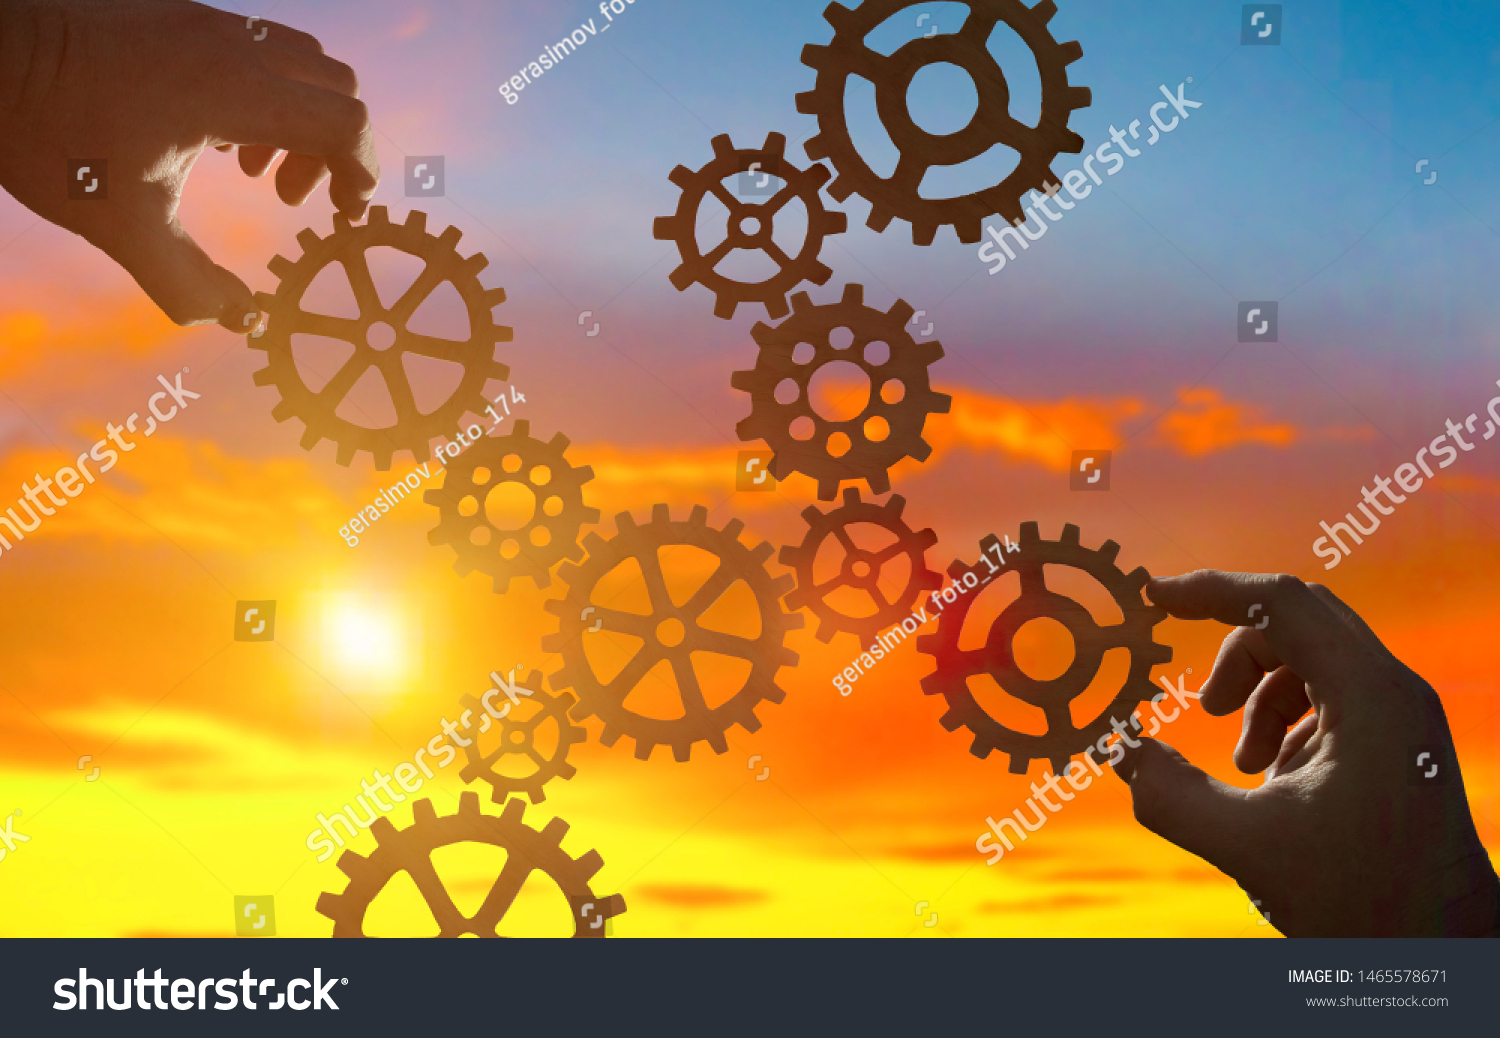 Hands collect gear in a puzzle against the sky in the sunset. Business concept idea, partnership, innovation, teamwork, cooperation #1465578671